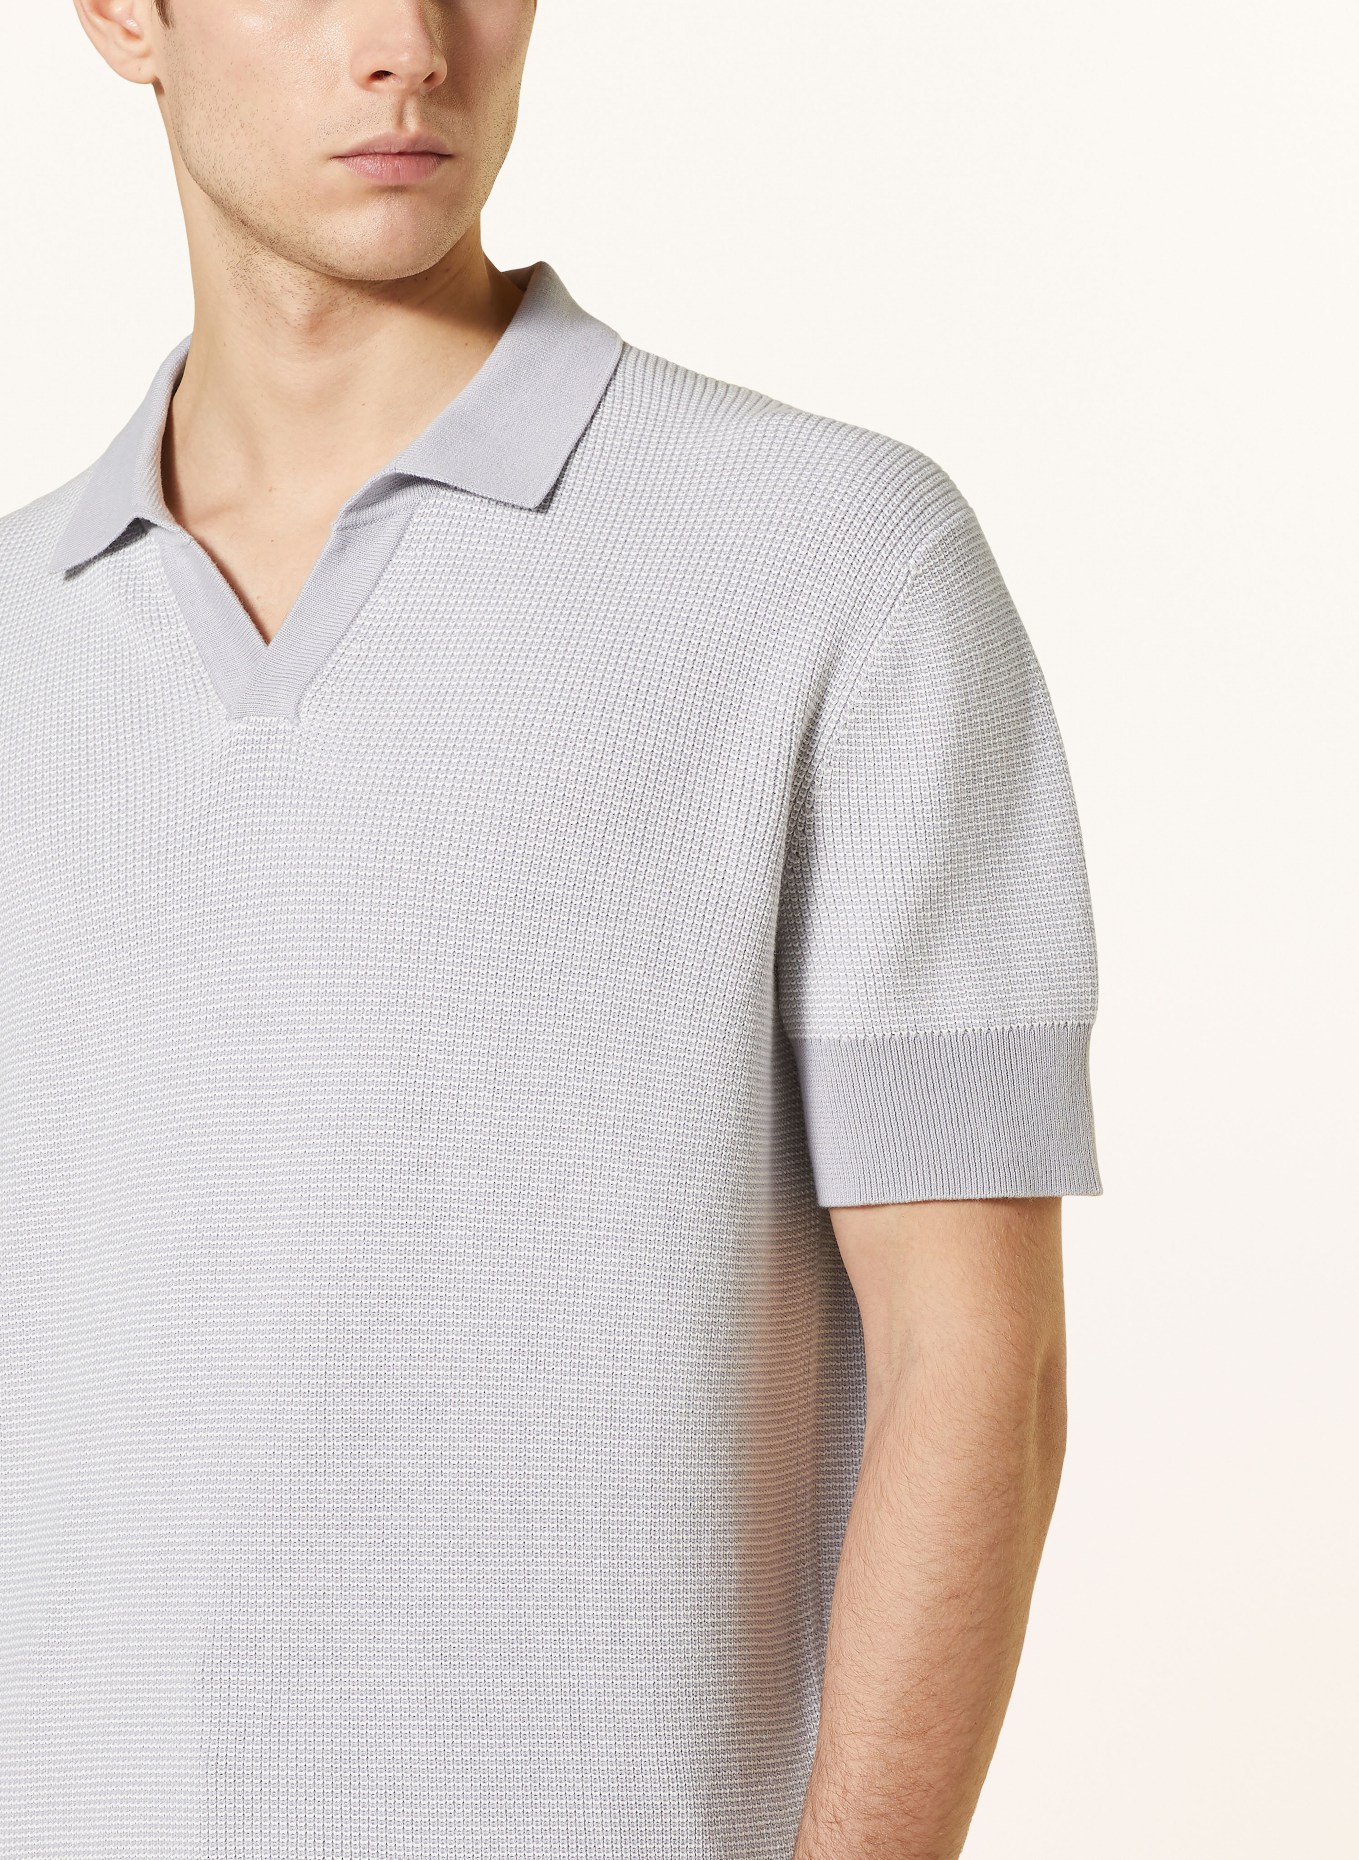 STROKESMAN'S Knitted polo shirt, Color: LIGHT GRAY (Image 4)